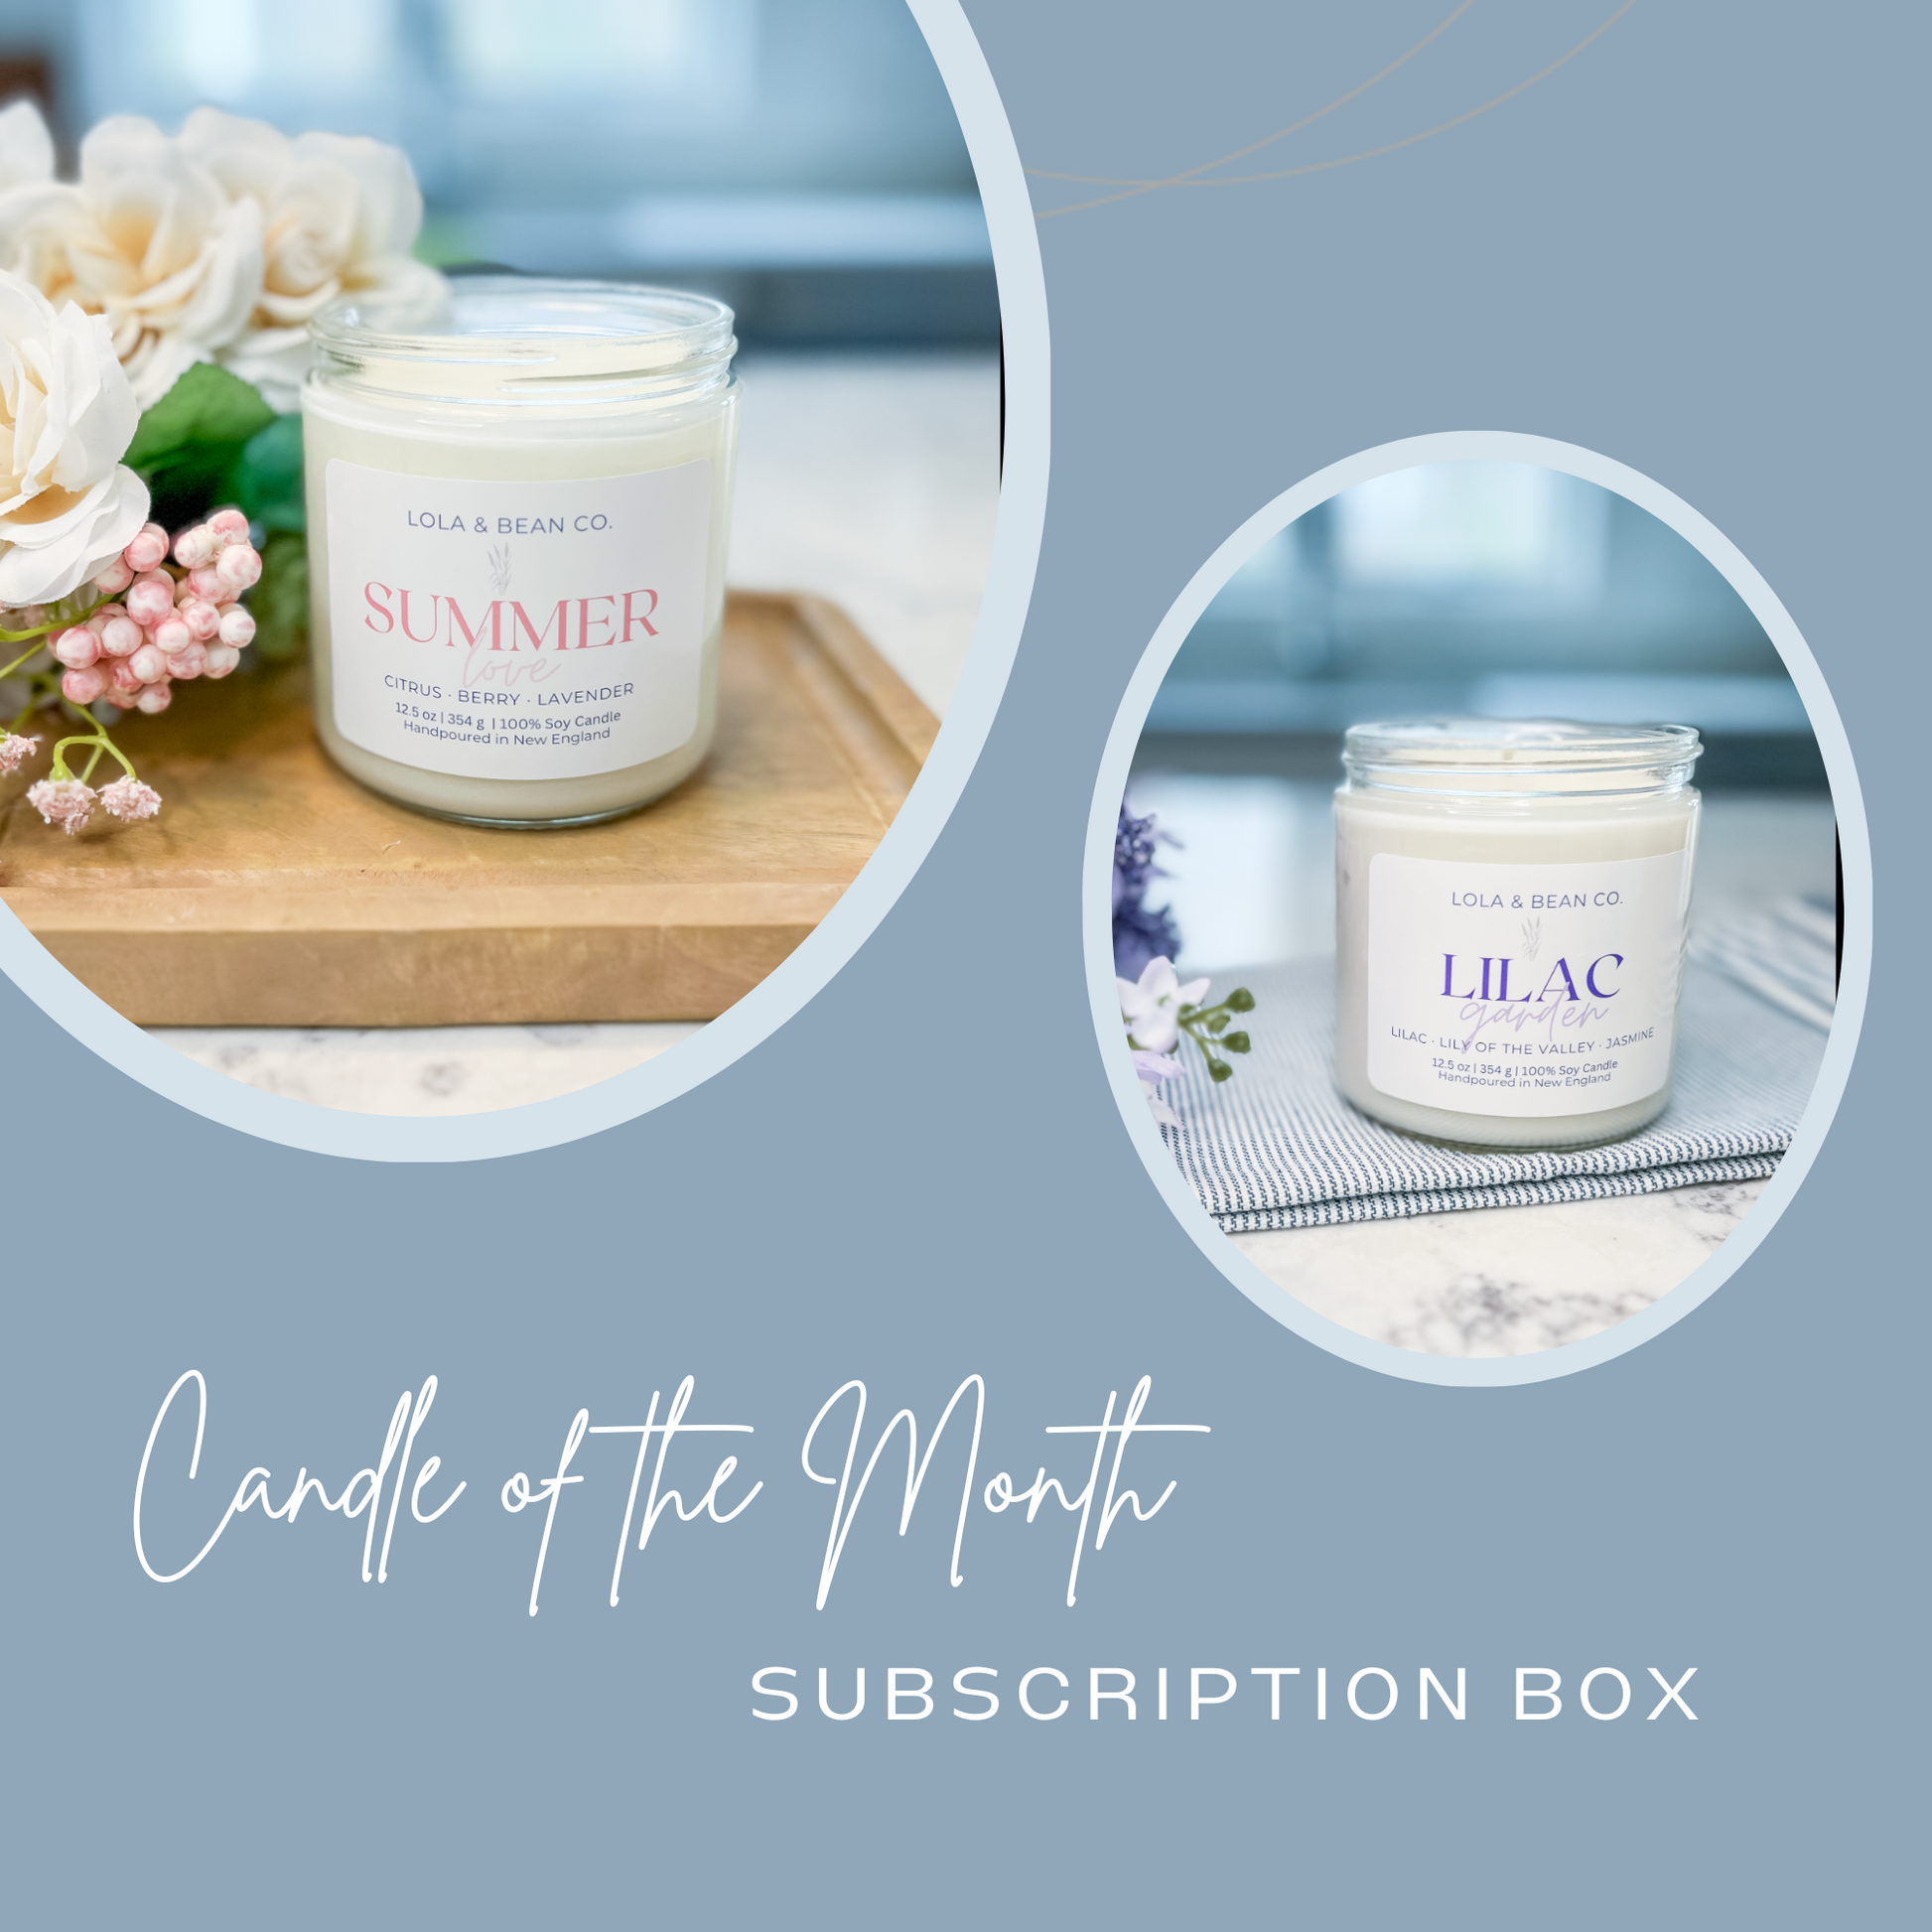 Candle of the Month Ongoing Subscription Box – Wax & Wane Candles